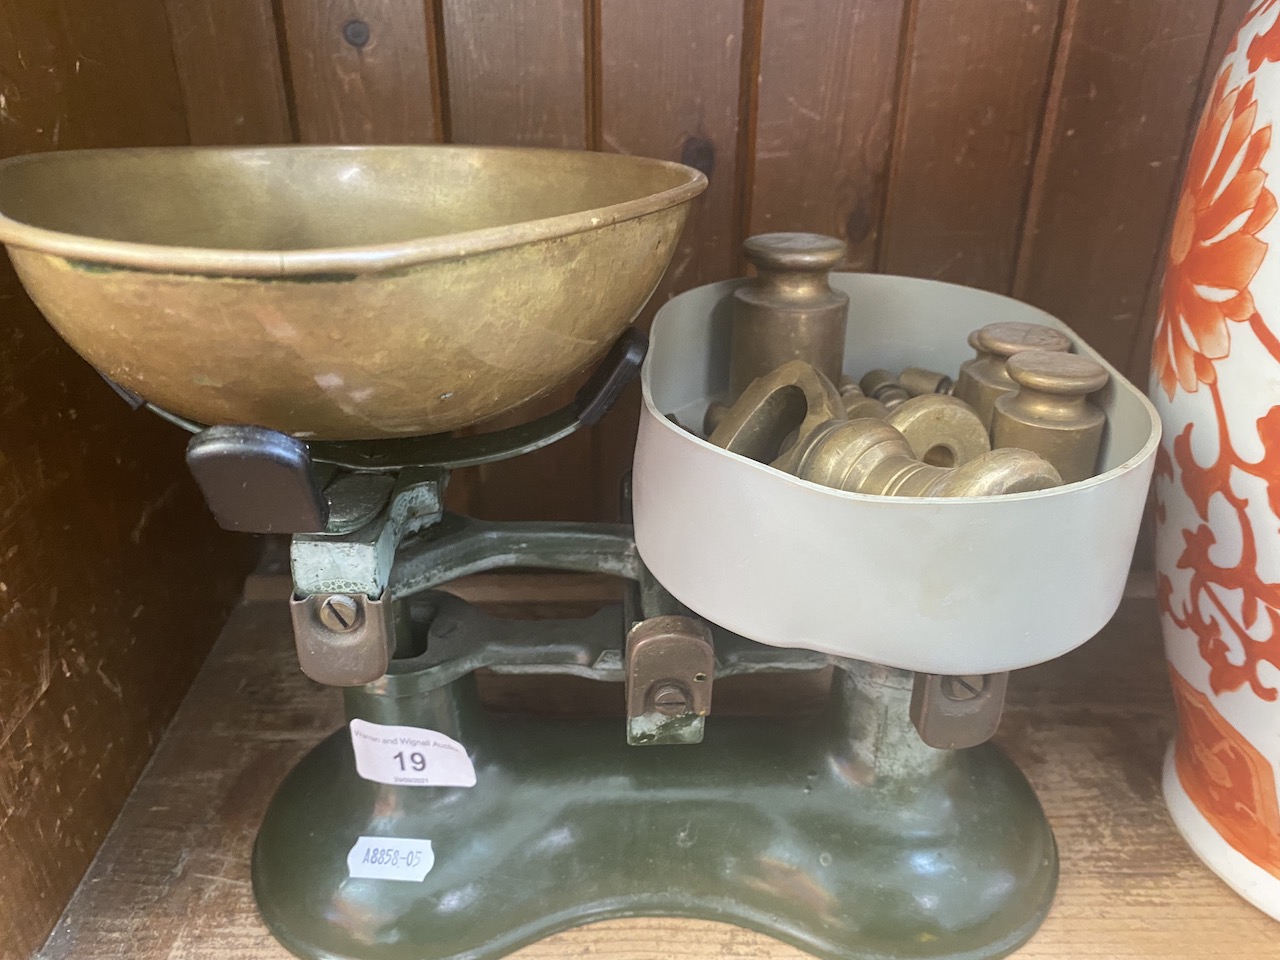 A set of vintage scales with weights